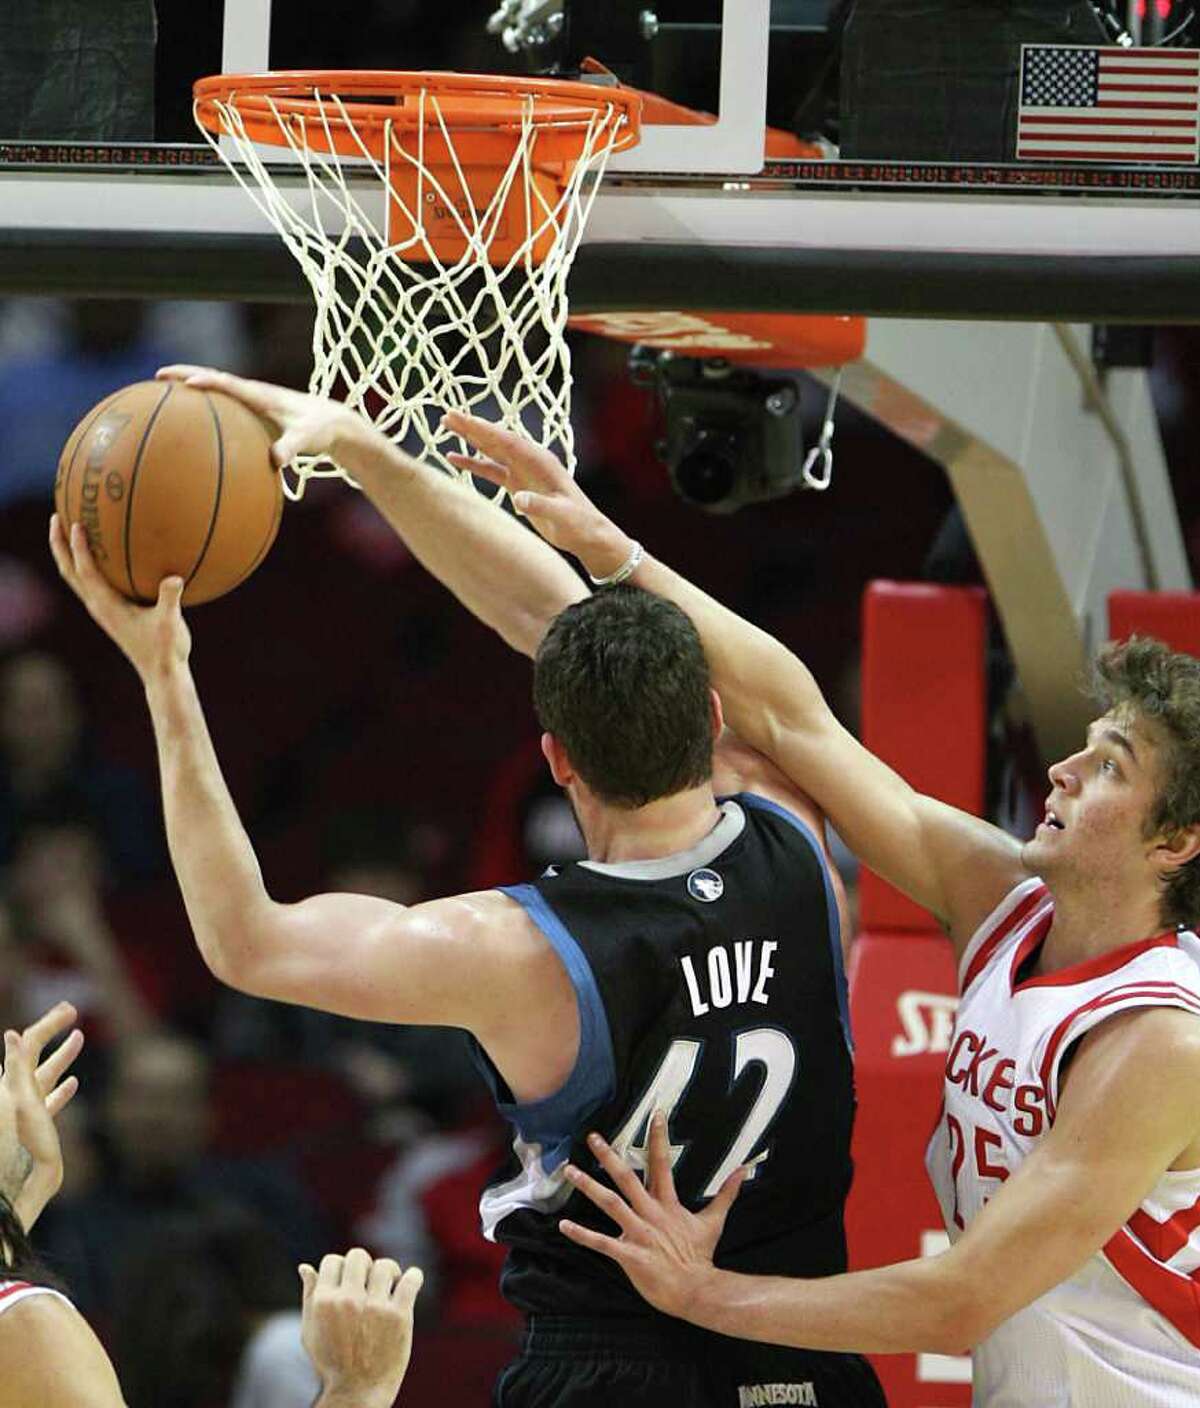 Try though he may, Chandler Parsons finds there's too much Kevin Love, left, between him and the ball.